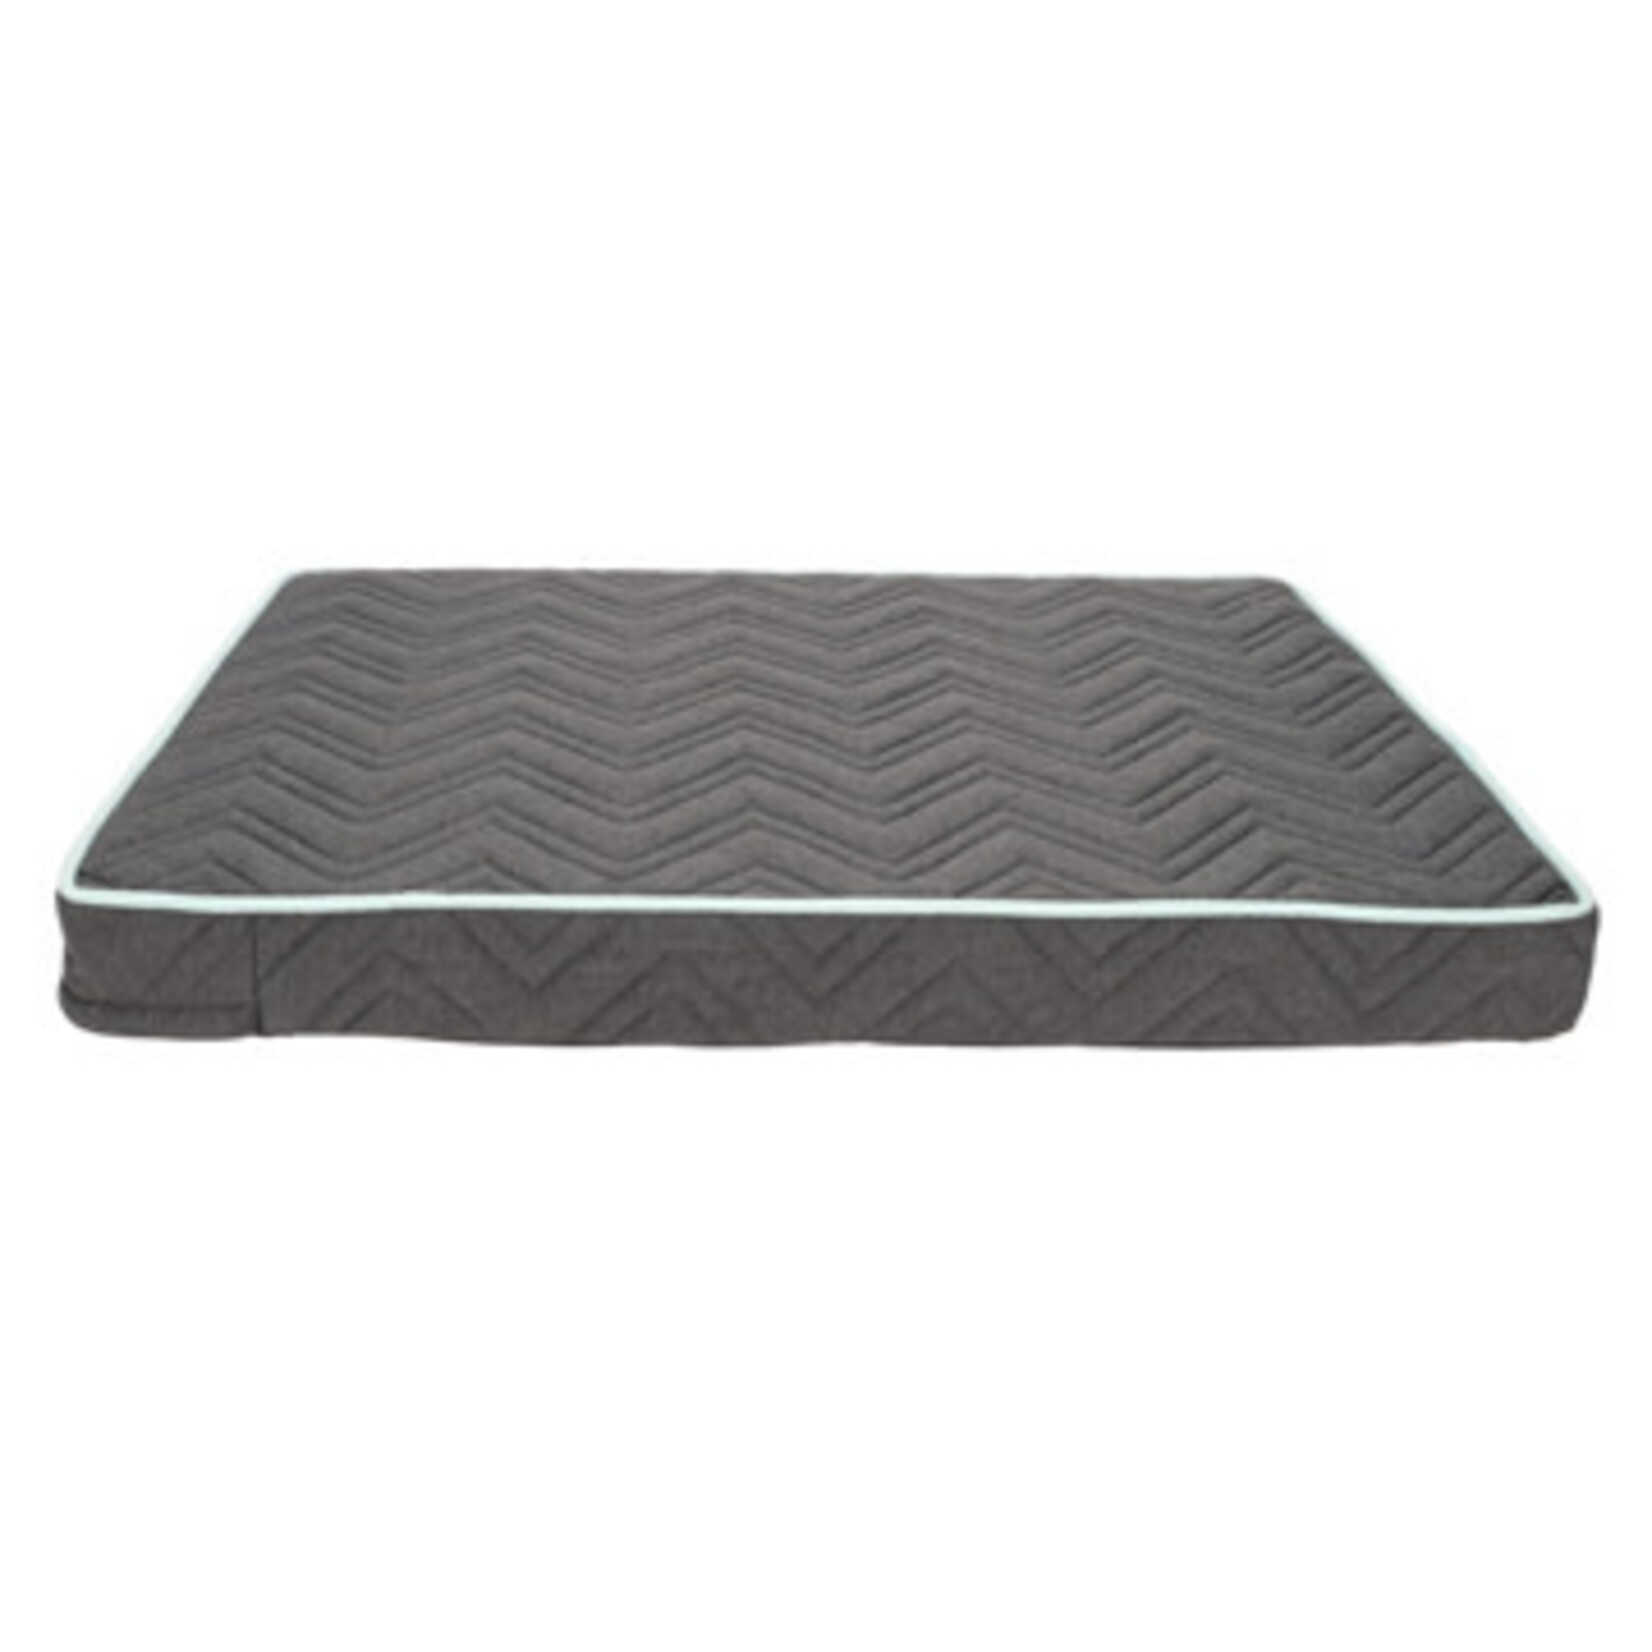 DogIt Dogit Dreamwell Interweave Orthopedic Bed - Grey - 81 x 61 x 8 cm (32in x 24in x 3in)